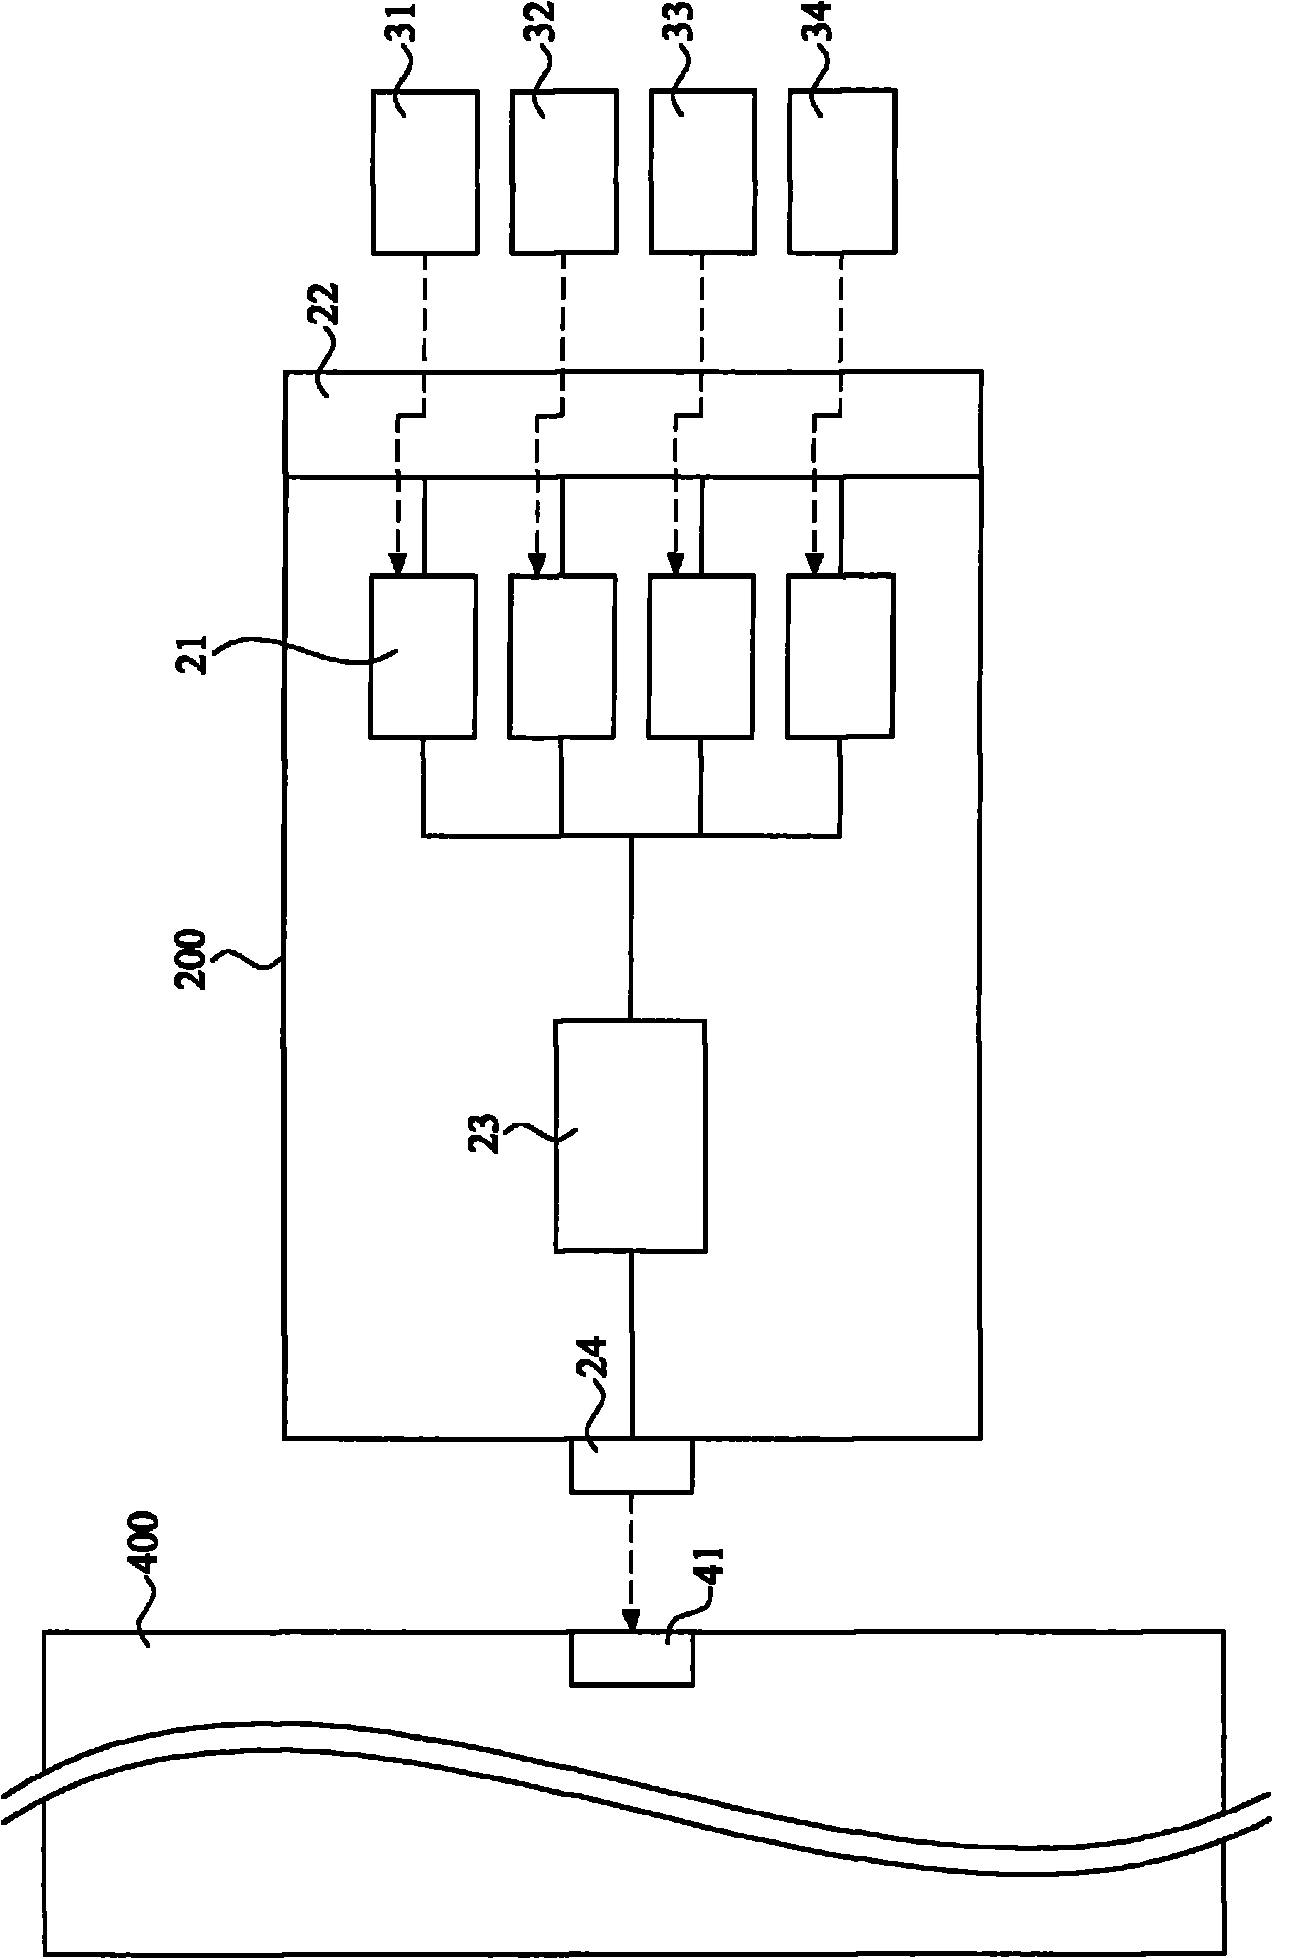 Multislot-type female card and portable-type communication device supporting multimode wireless internet